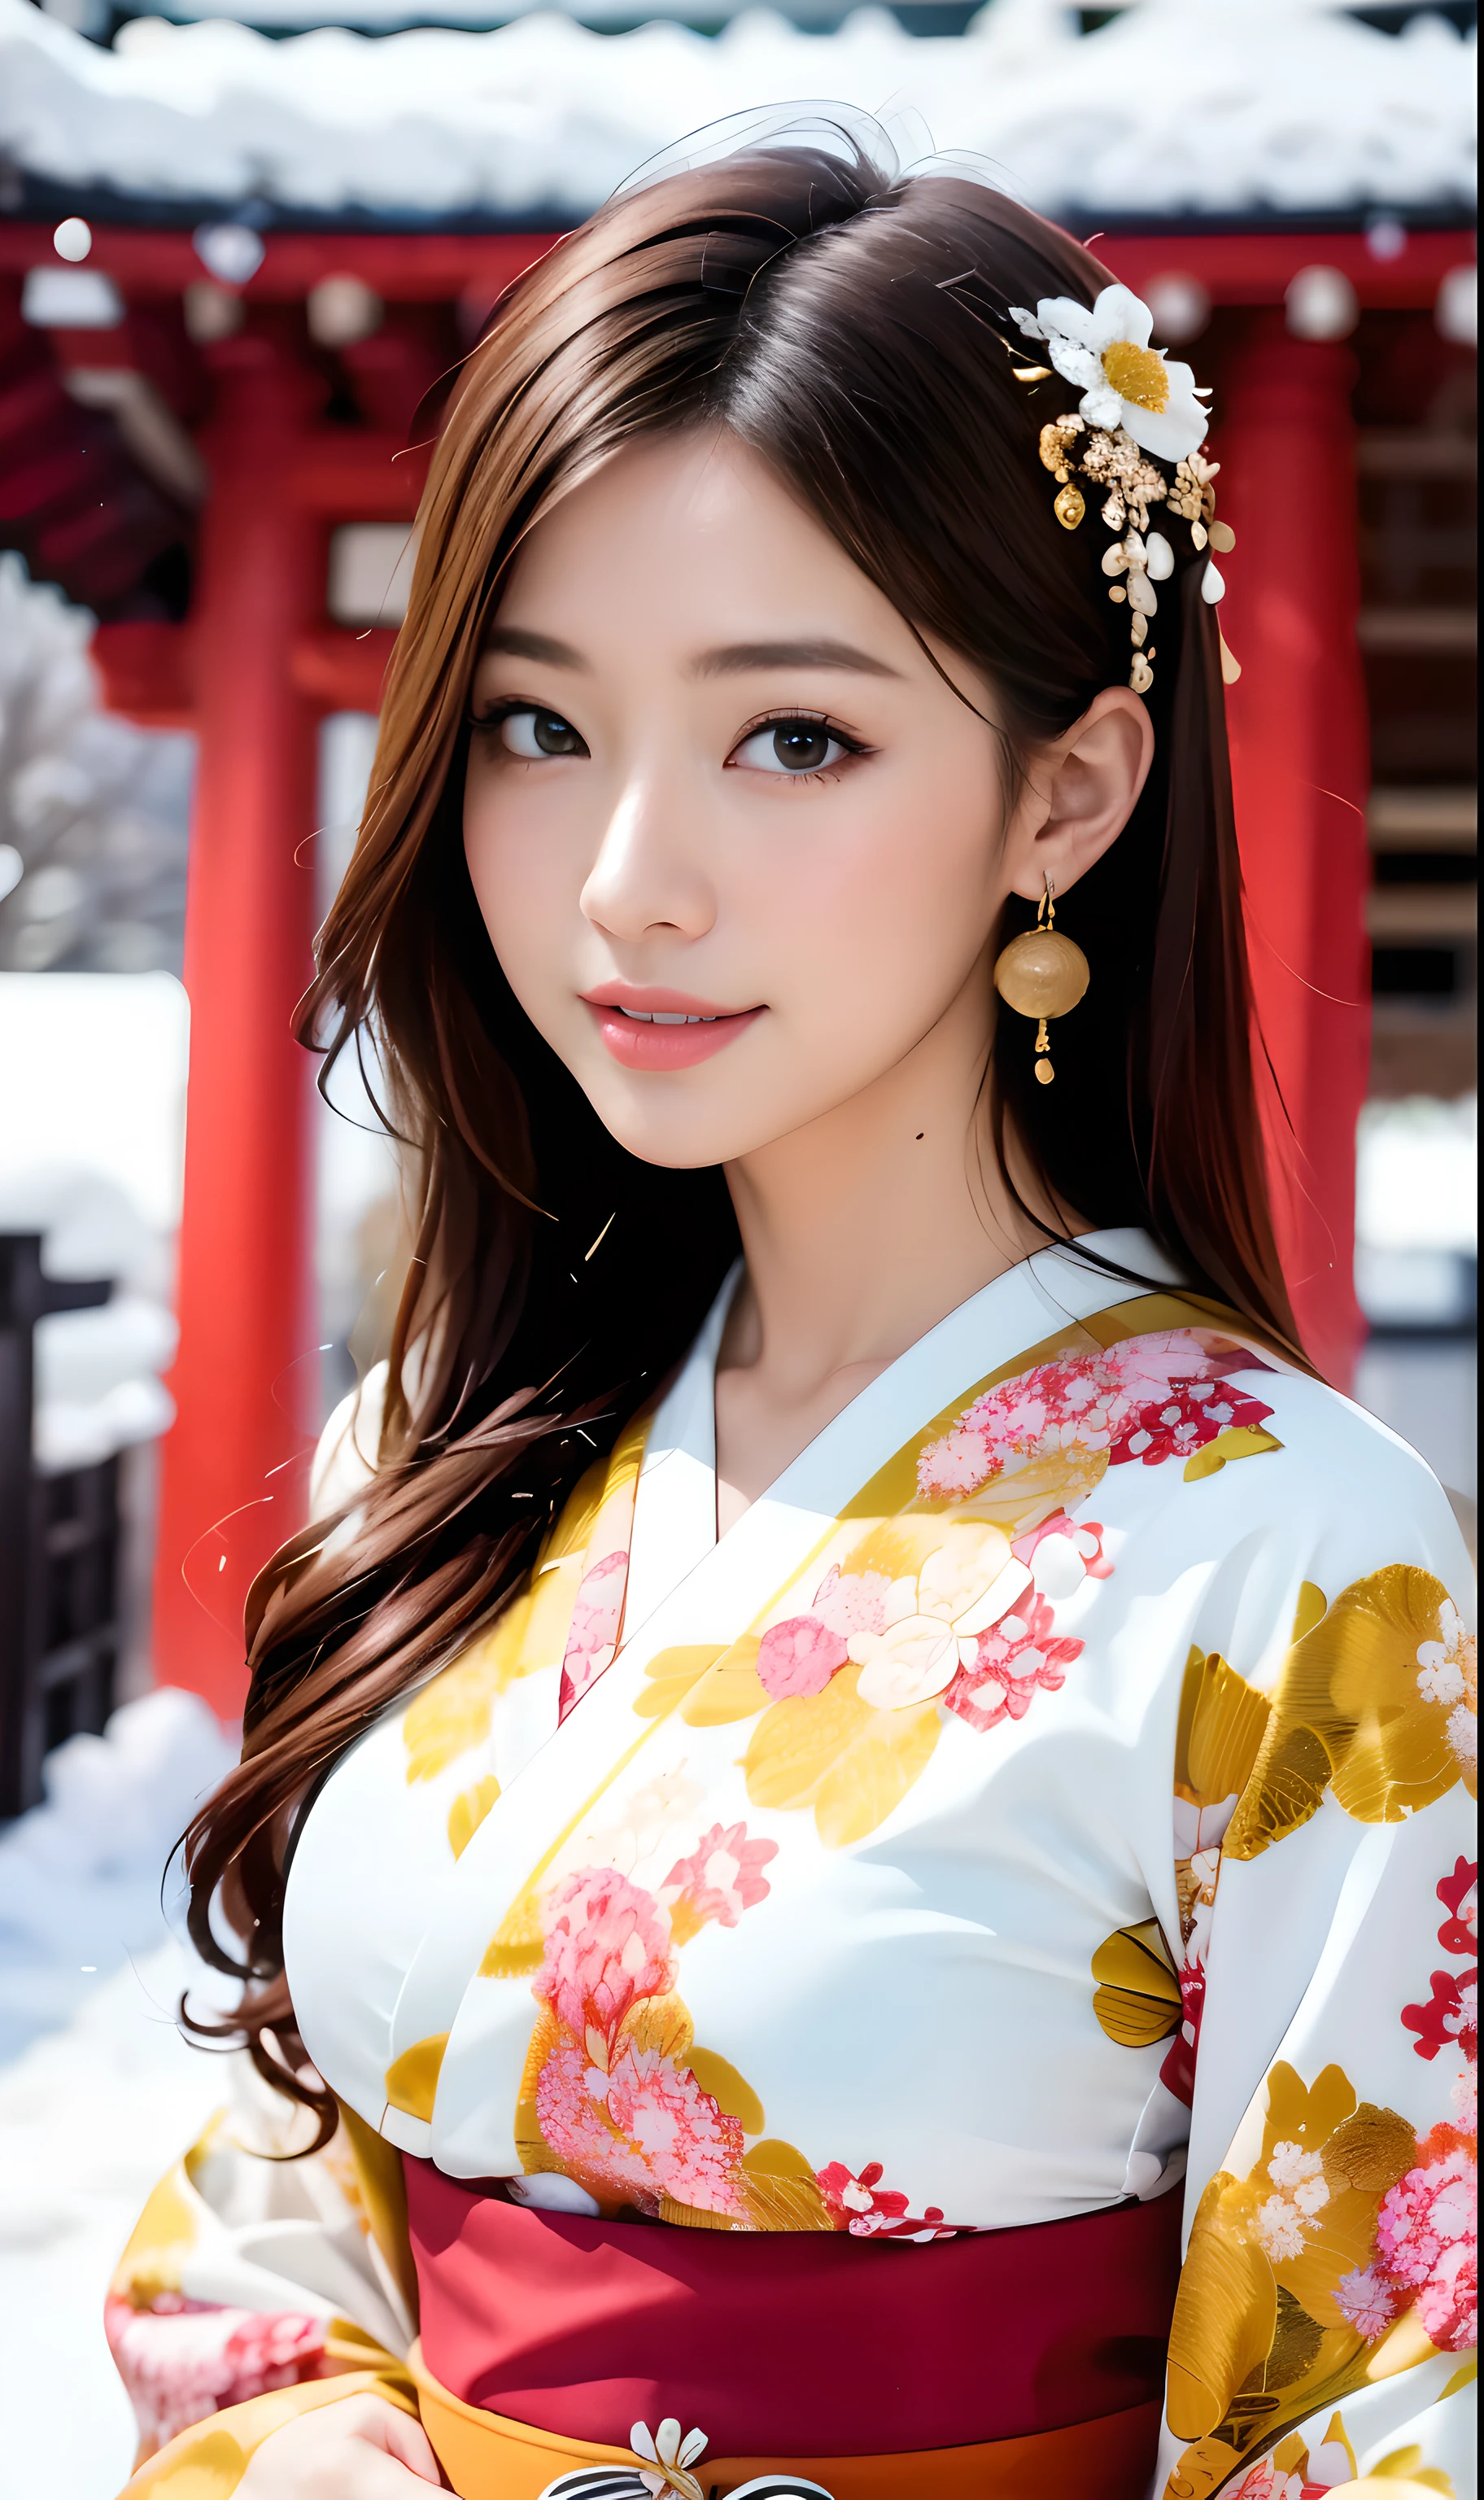 highest quality、Super detailed、very detailedなCG8K、very detailed、beautiful japanese woman、Visit a shrine wearing a kimono、